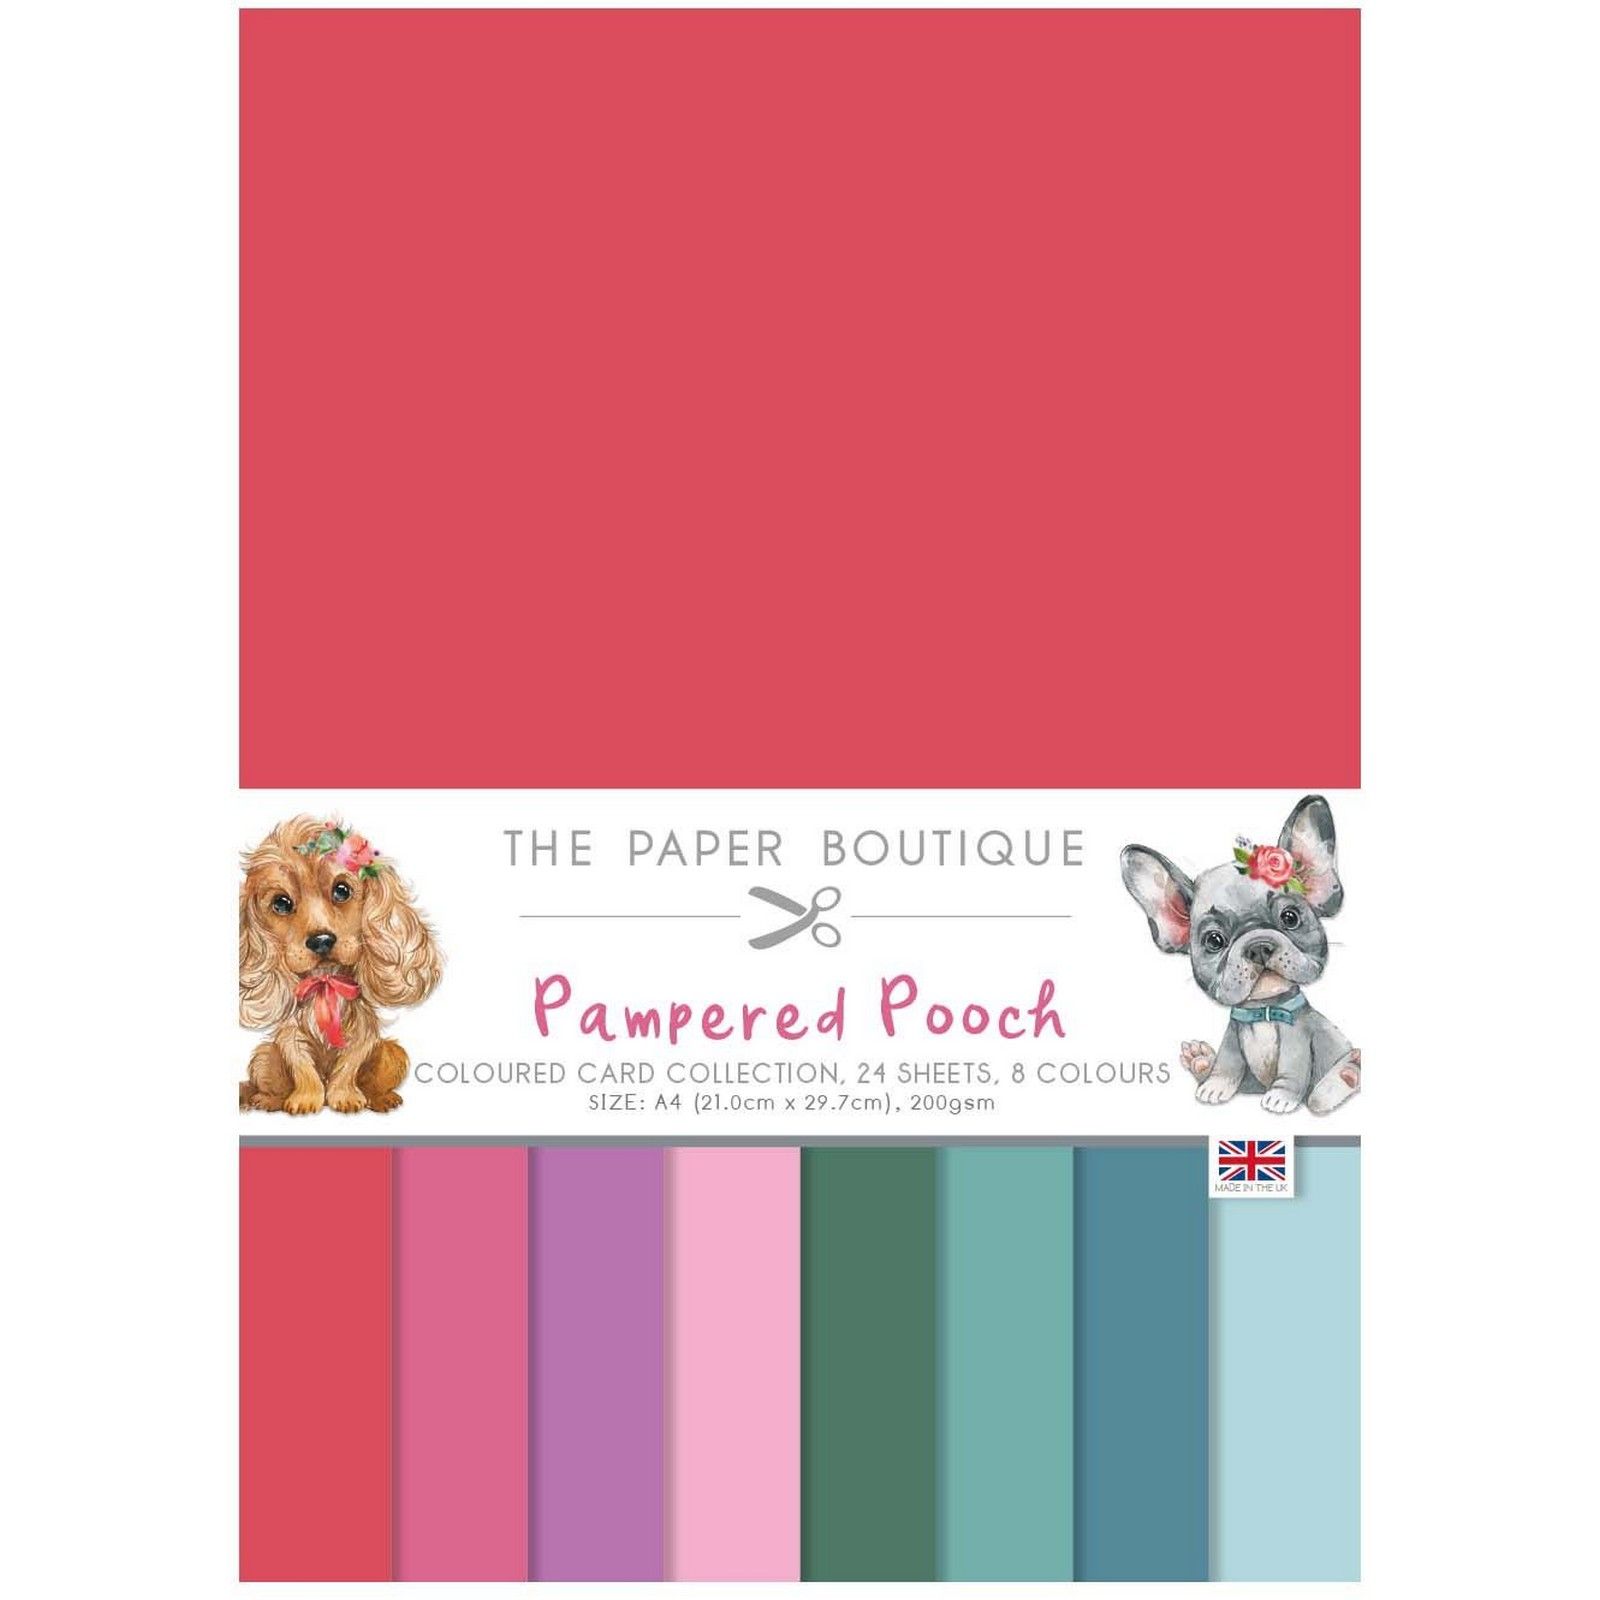 The Paper Boutique • Pampered Pooch Colour Card Collection